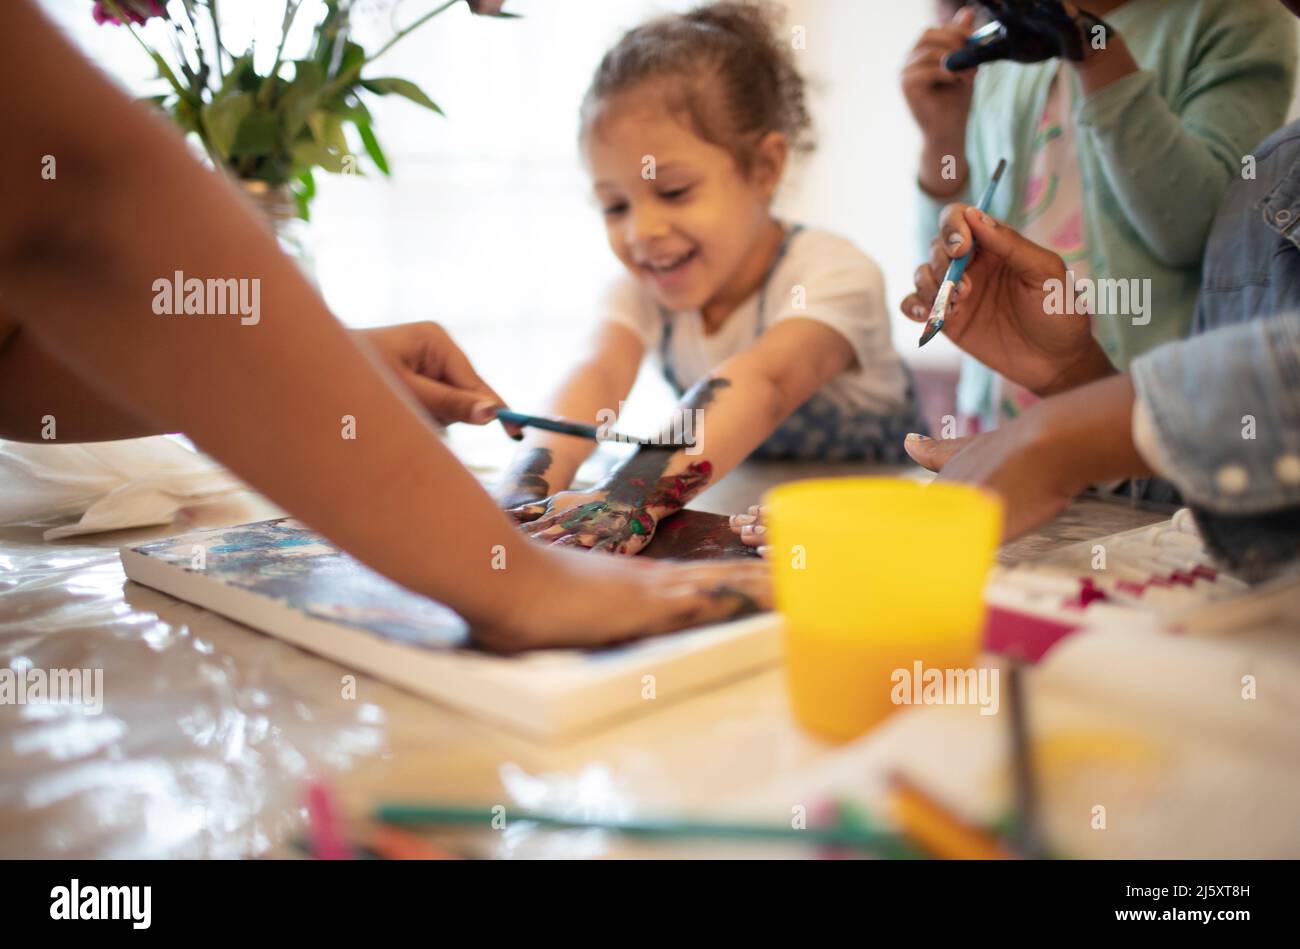 Family finger painting at table Stock Photo